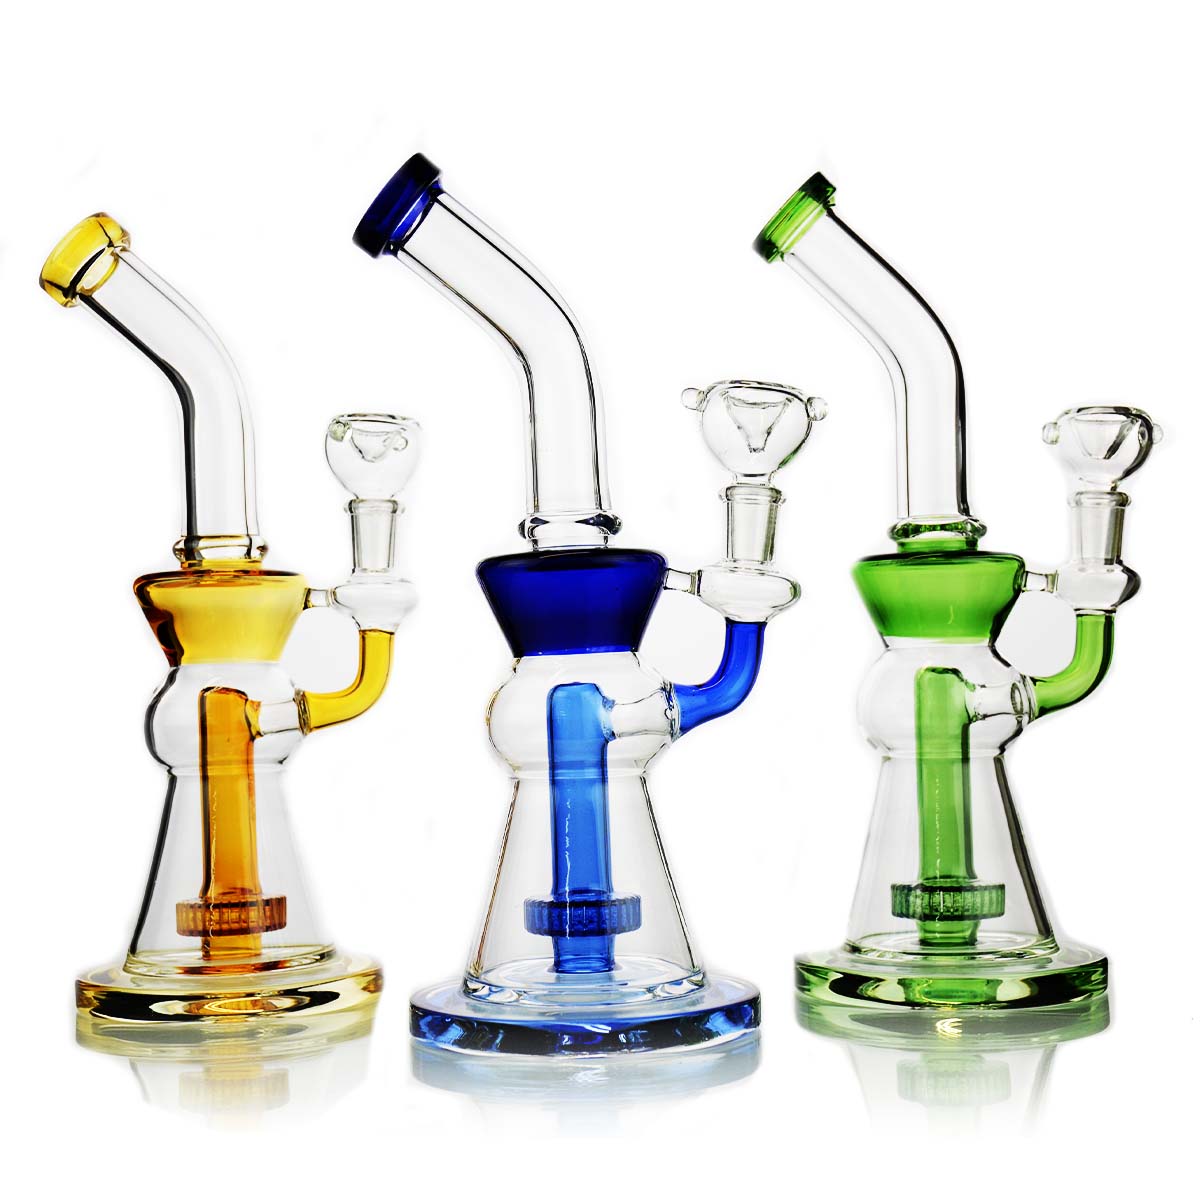 10" Conical Bong with Color Metric Shower 14mm Male Bowl Included - LA Wholesale Kings